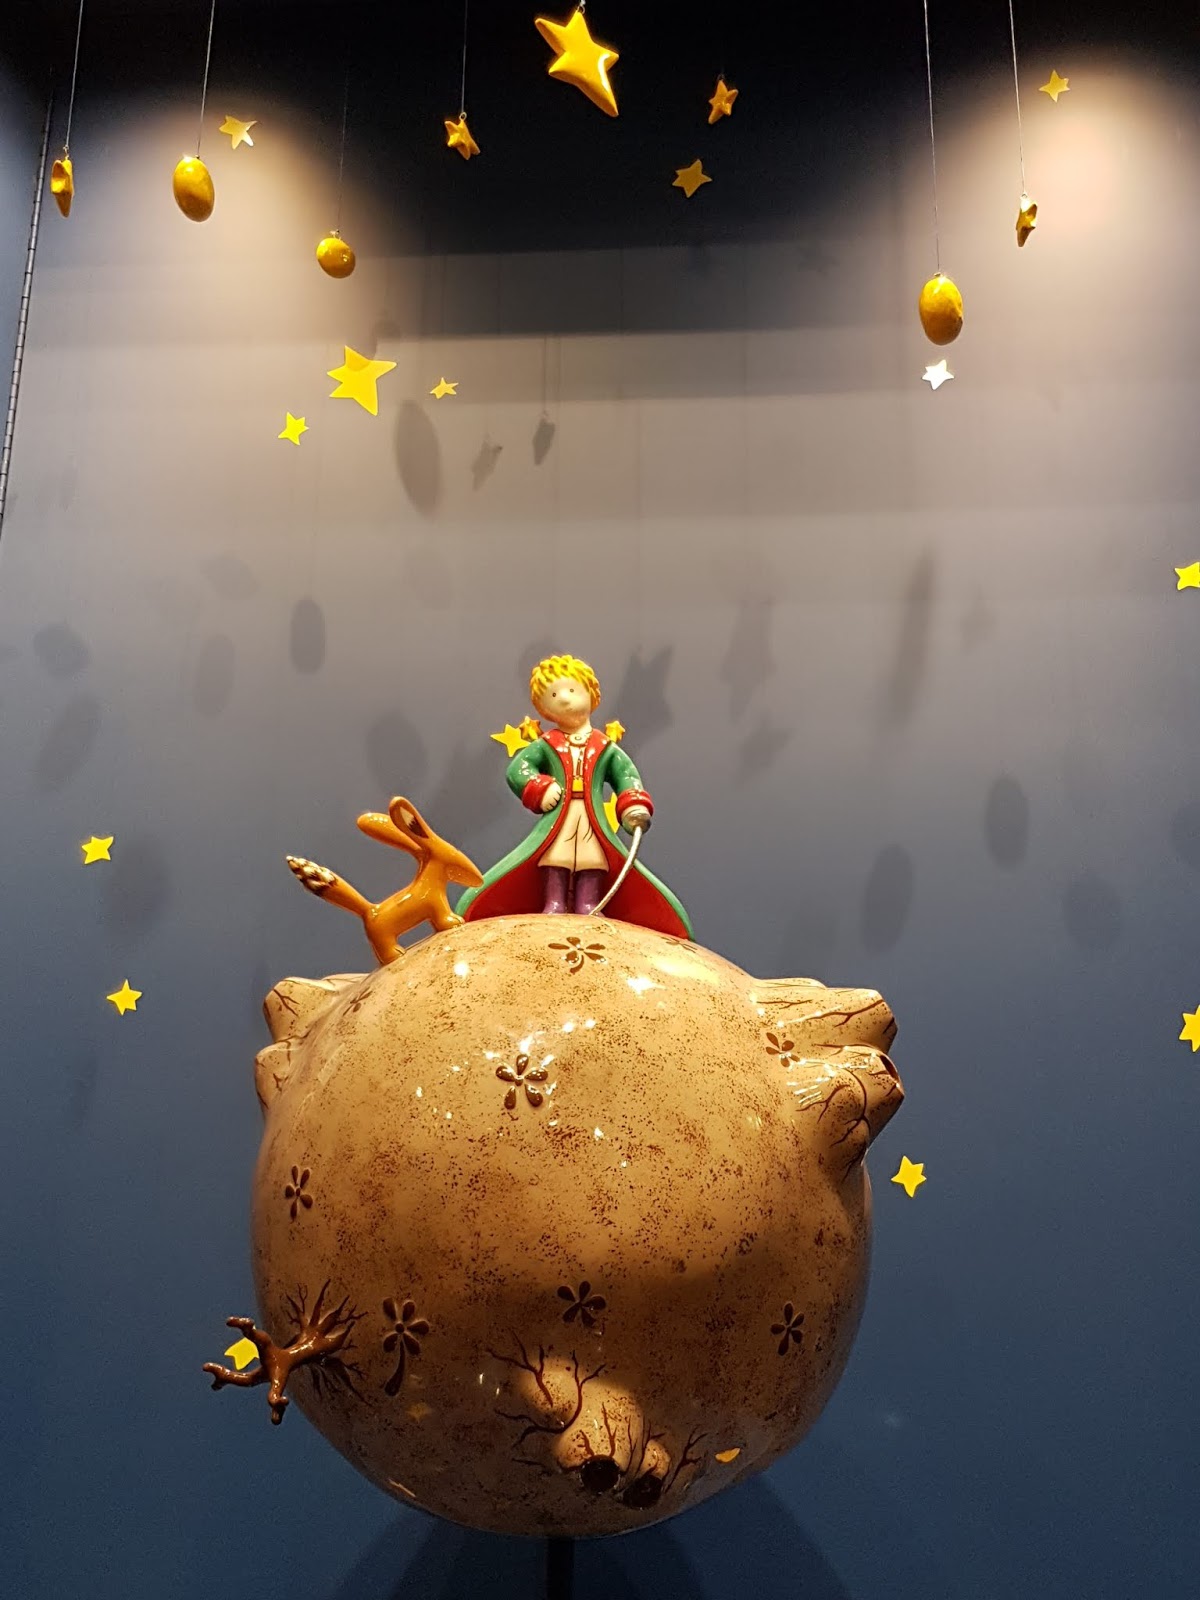 Little Prince: Behind The Story - A Glimpse Into The Le Petit Prince